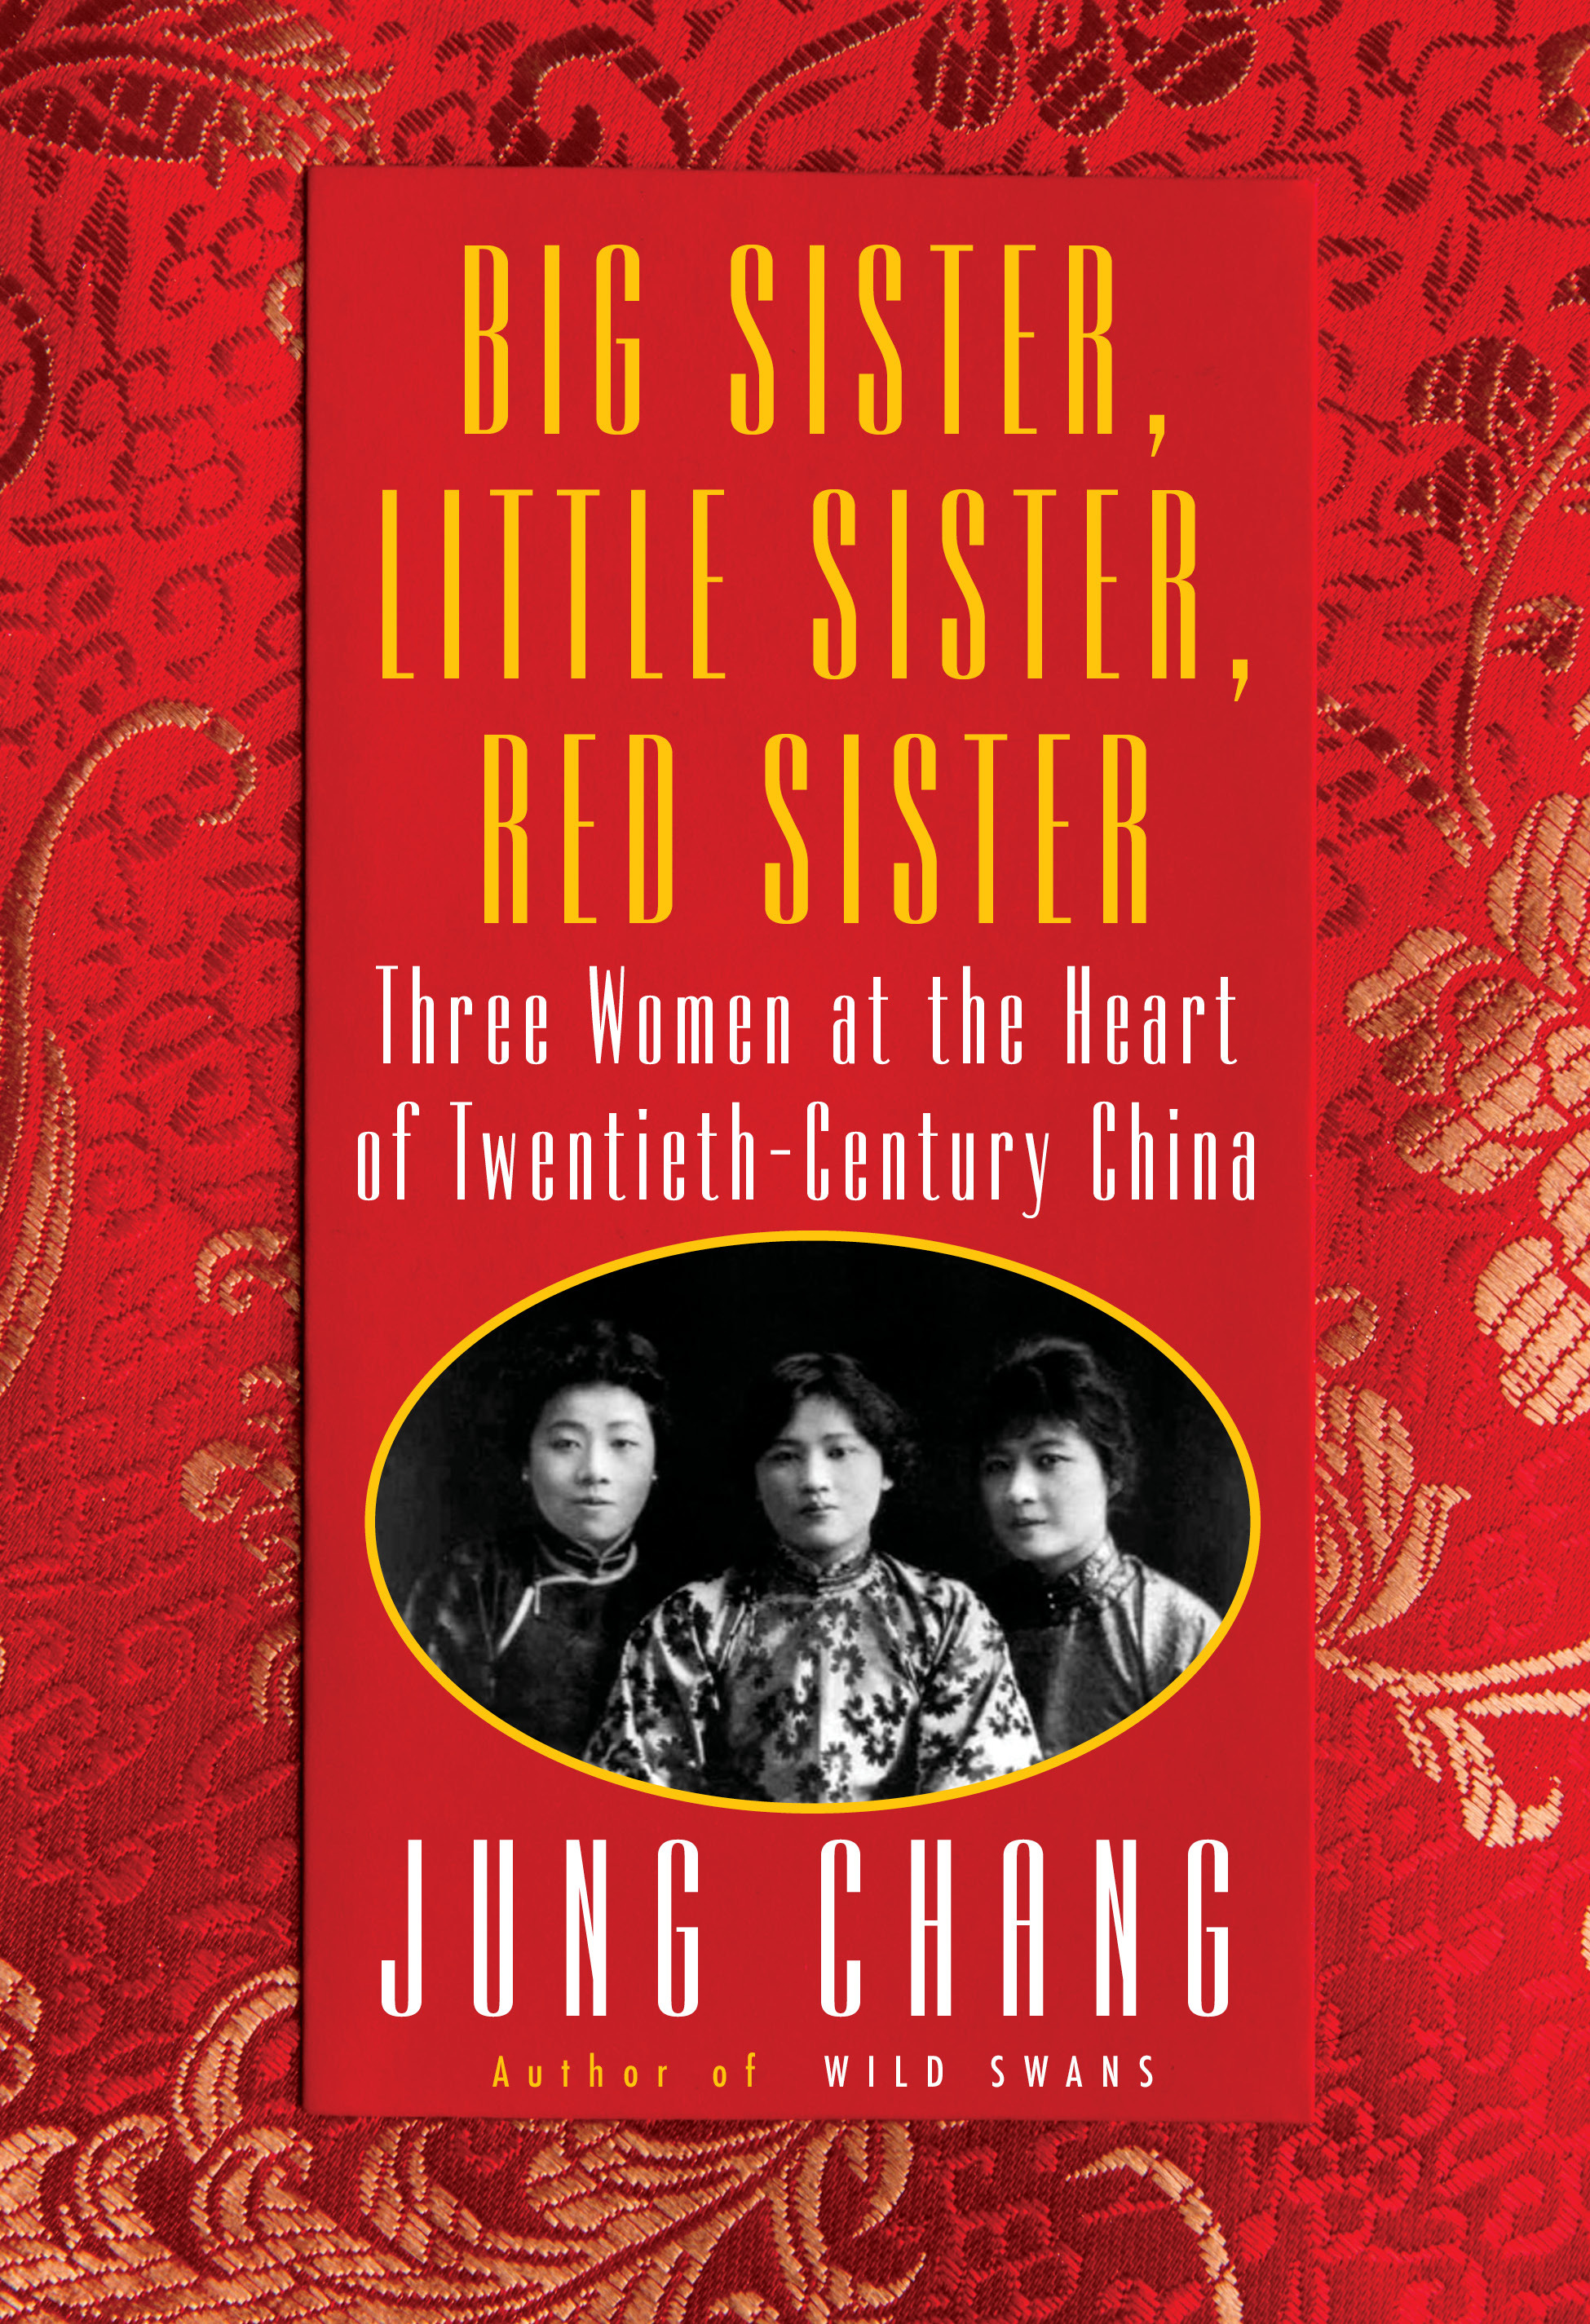 Big Sister, Little Sister, Red Sister is author Jung Chang's biography of the three Soong sisters